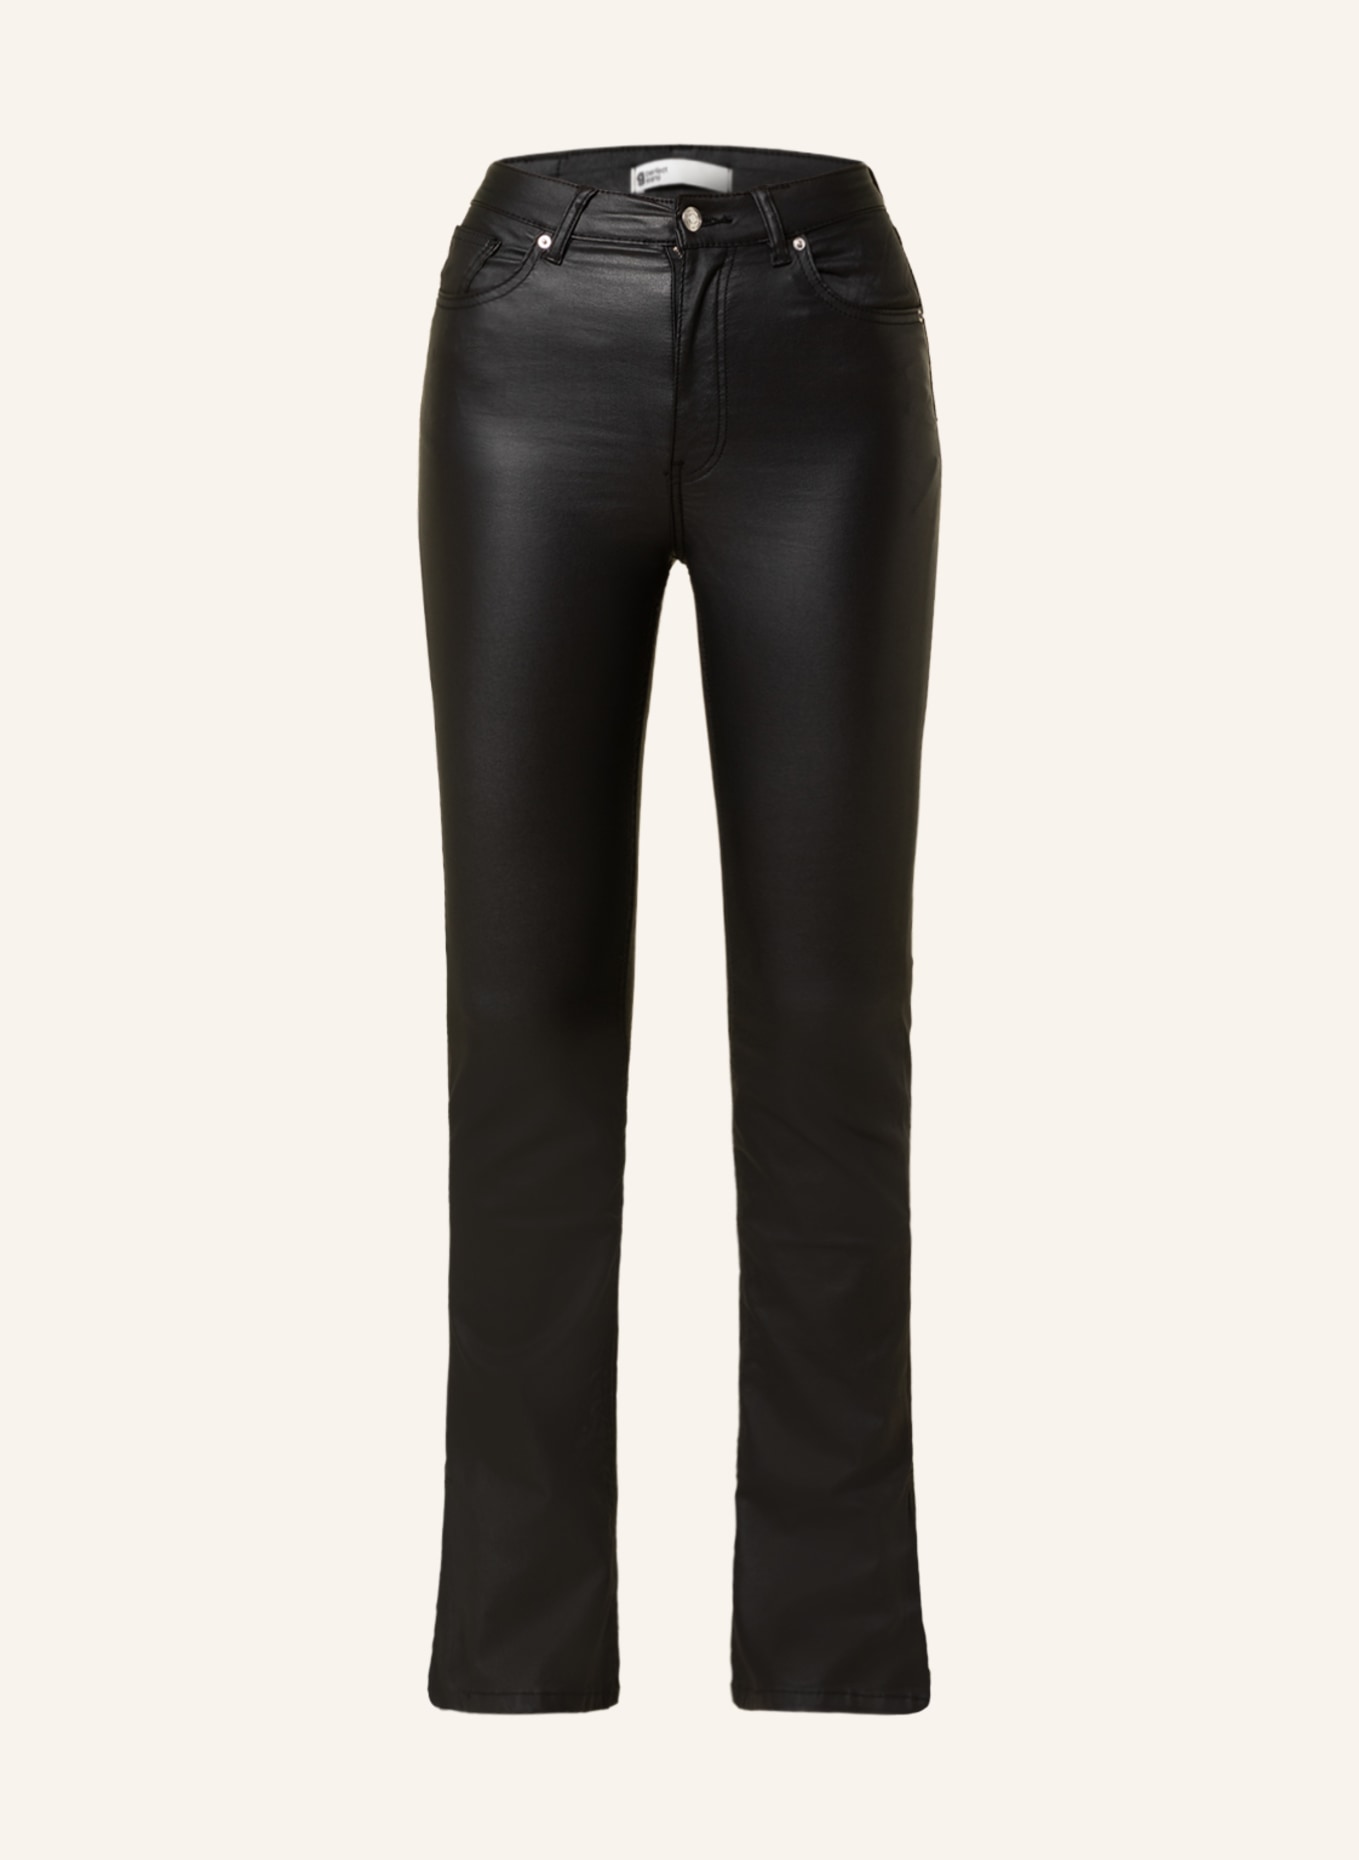 Molly coated jeans - Black - Women - Gina Tricot